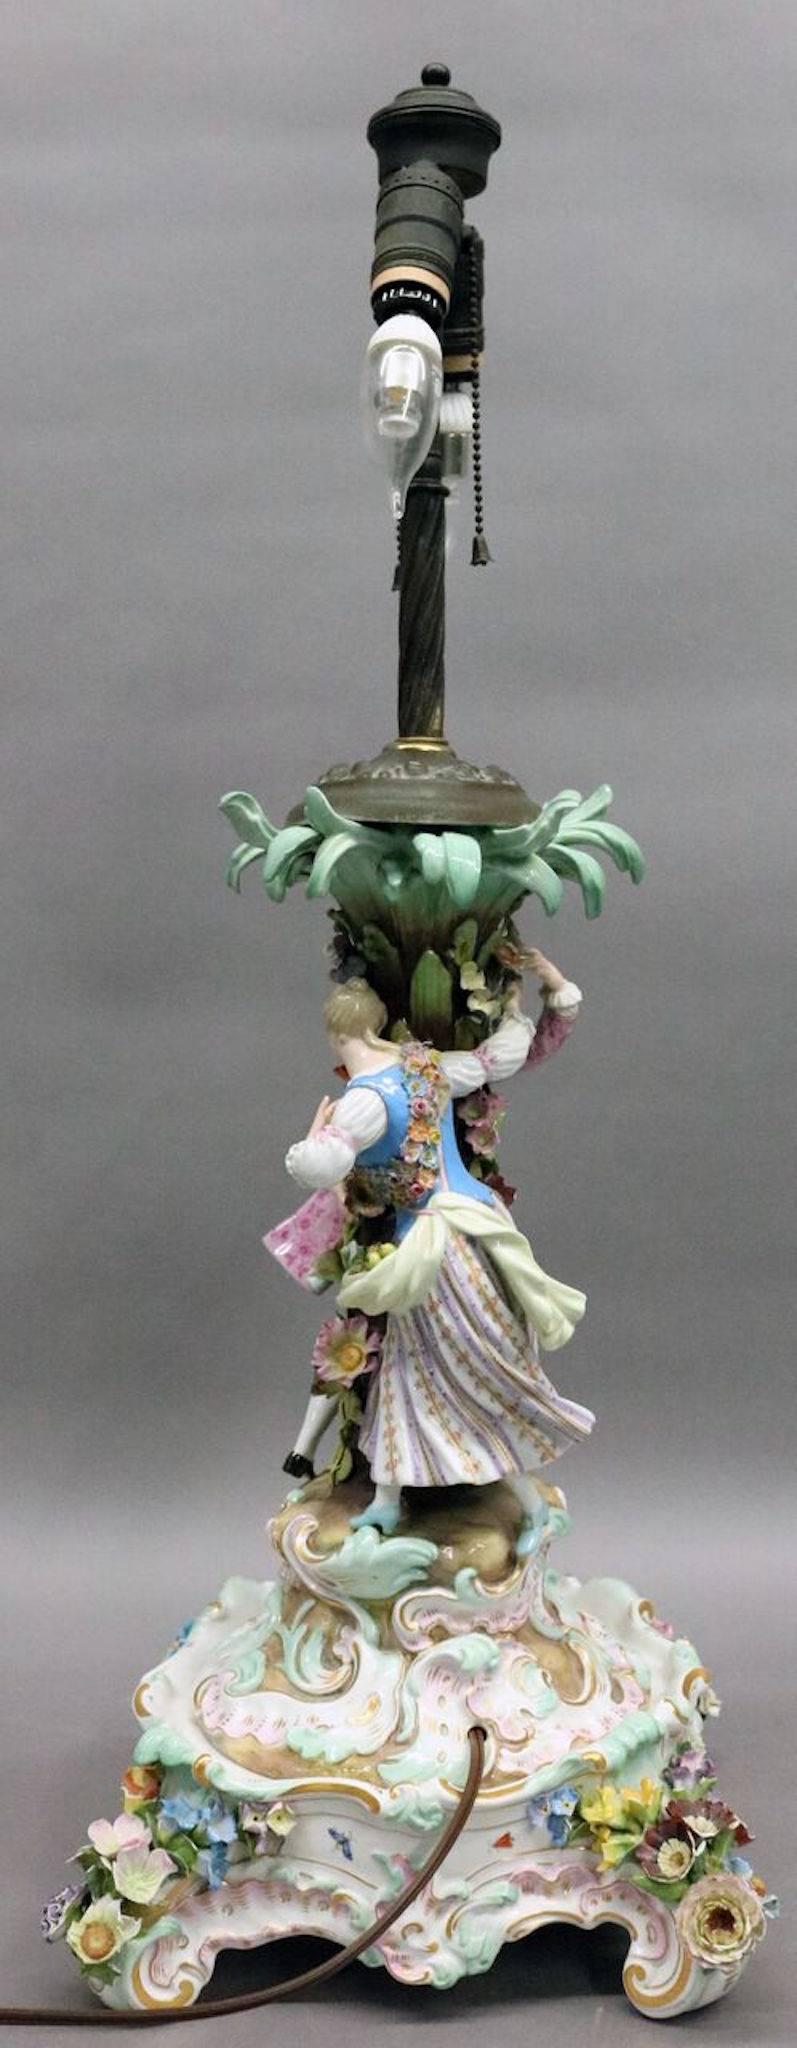 Late 19th century Meissen Porcelain figural lamp base and stand features courting couple around floral decorated tree, classic crossed swords maker mark on base.